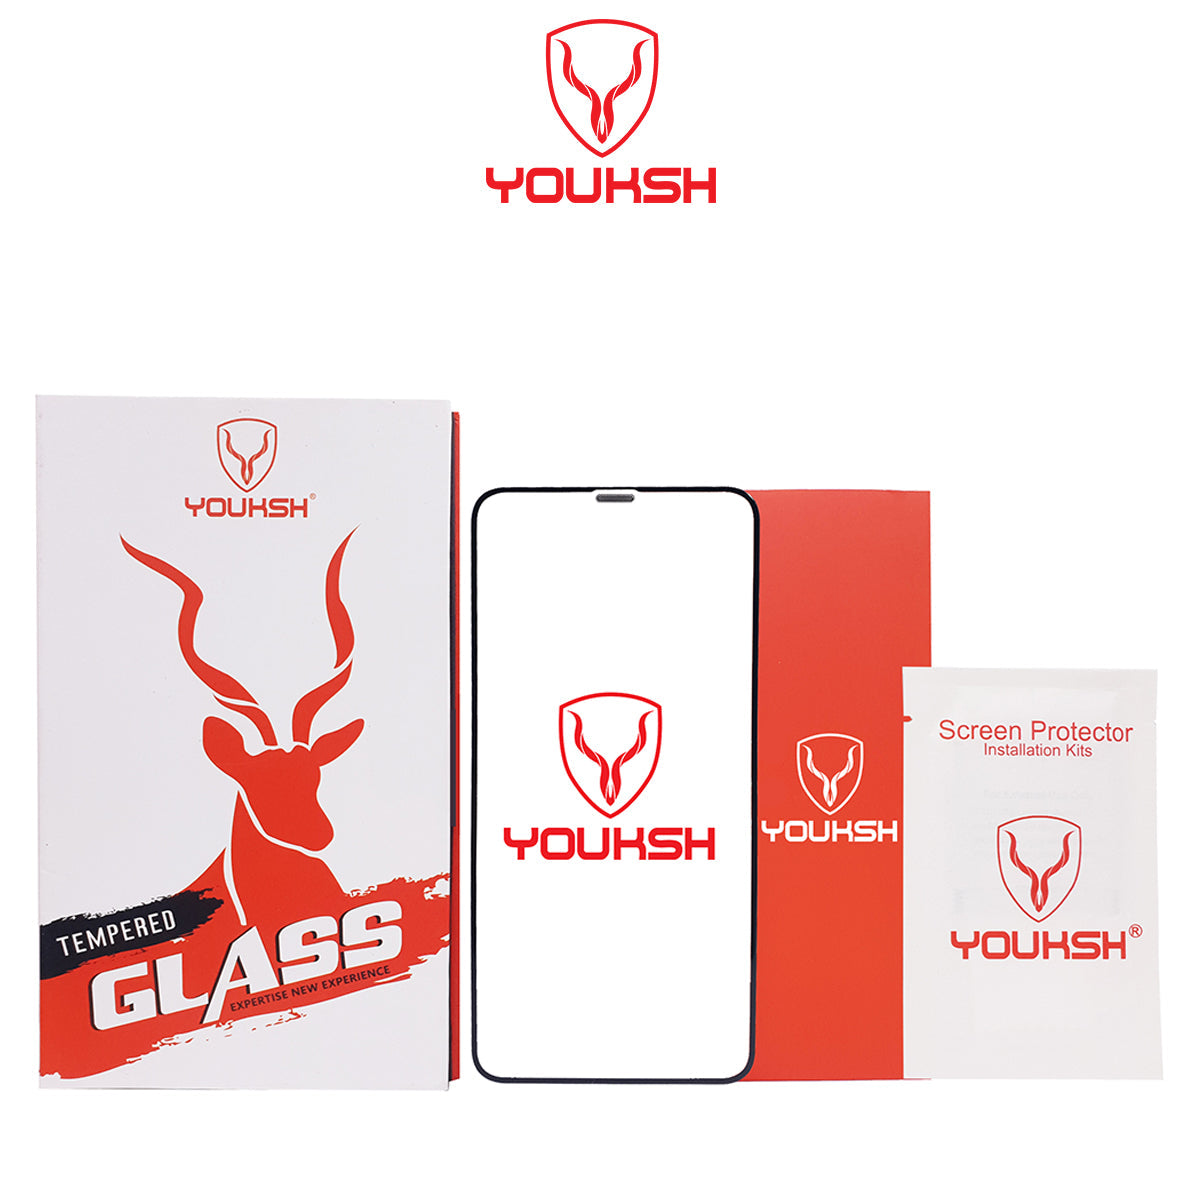 Apple iPhone XR - Youksh Anti Dust Glass Protector With Installation kit.